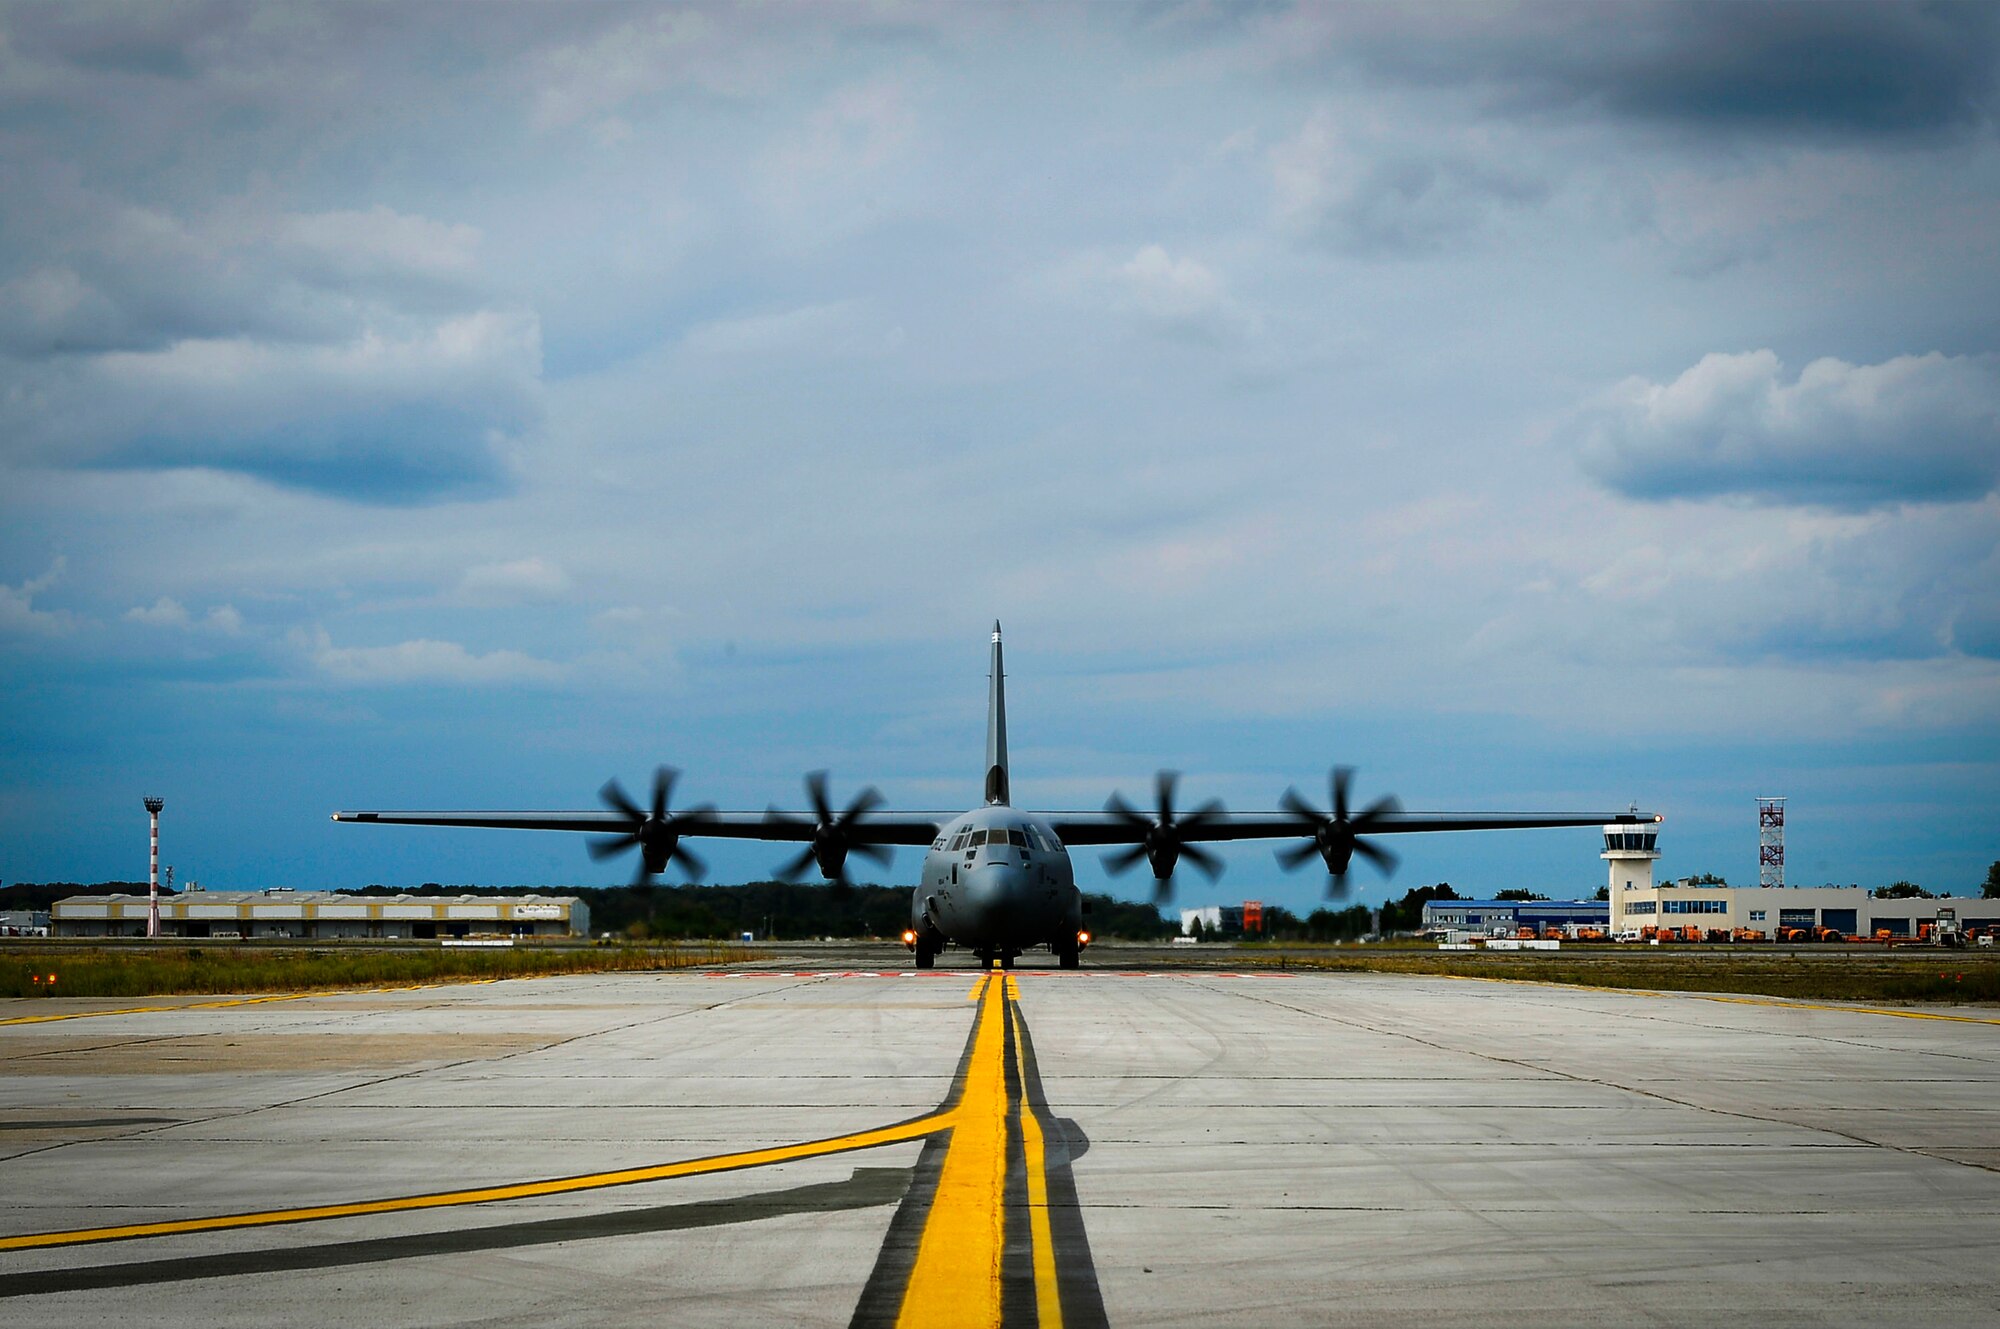 C-130J pilots train to deal with various challenging circumstances such as inclement weather and difficult terrain.